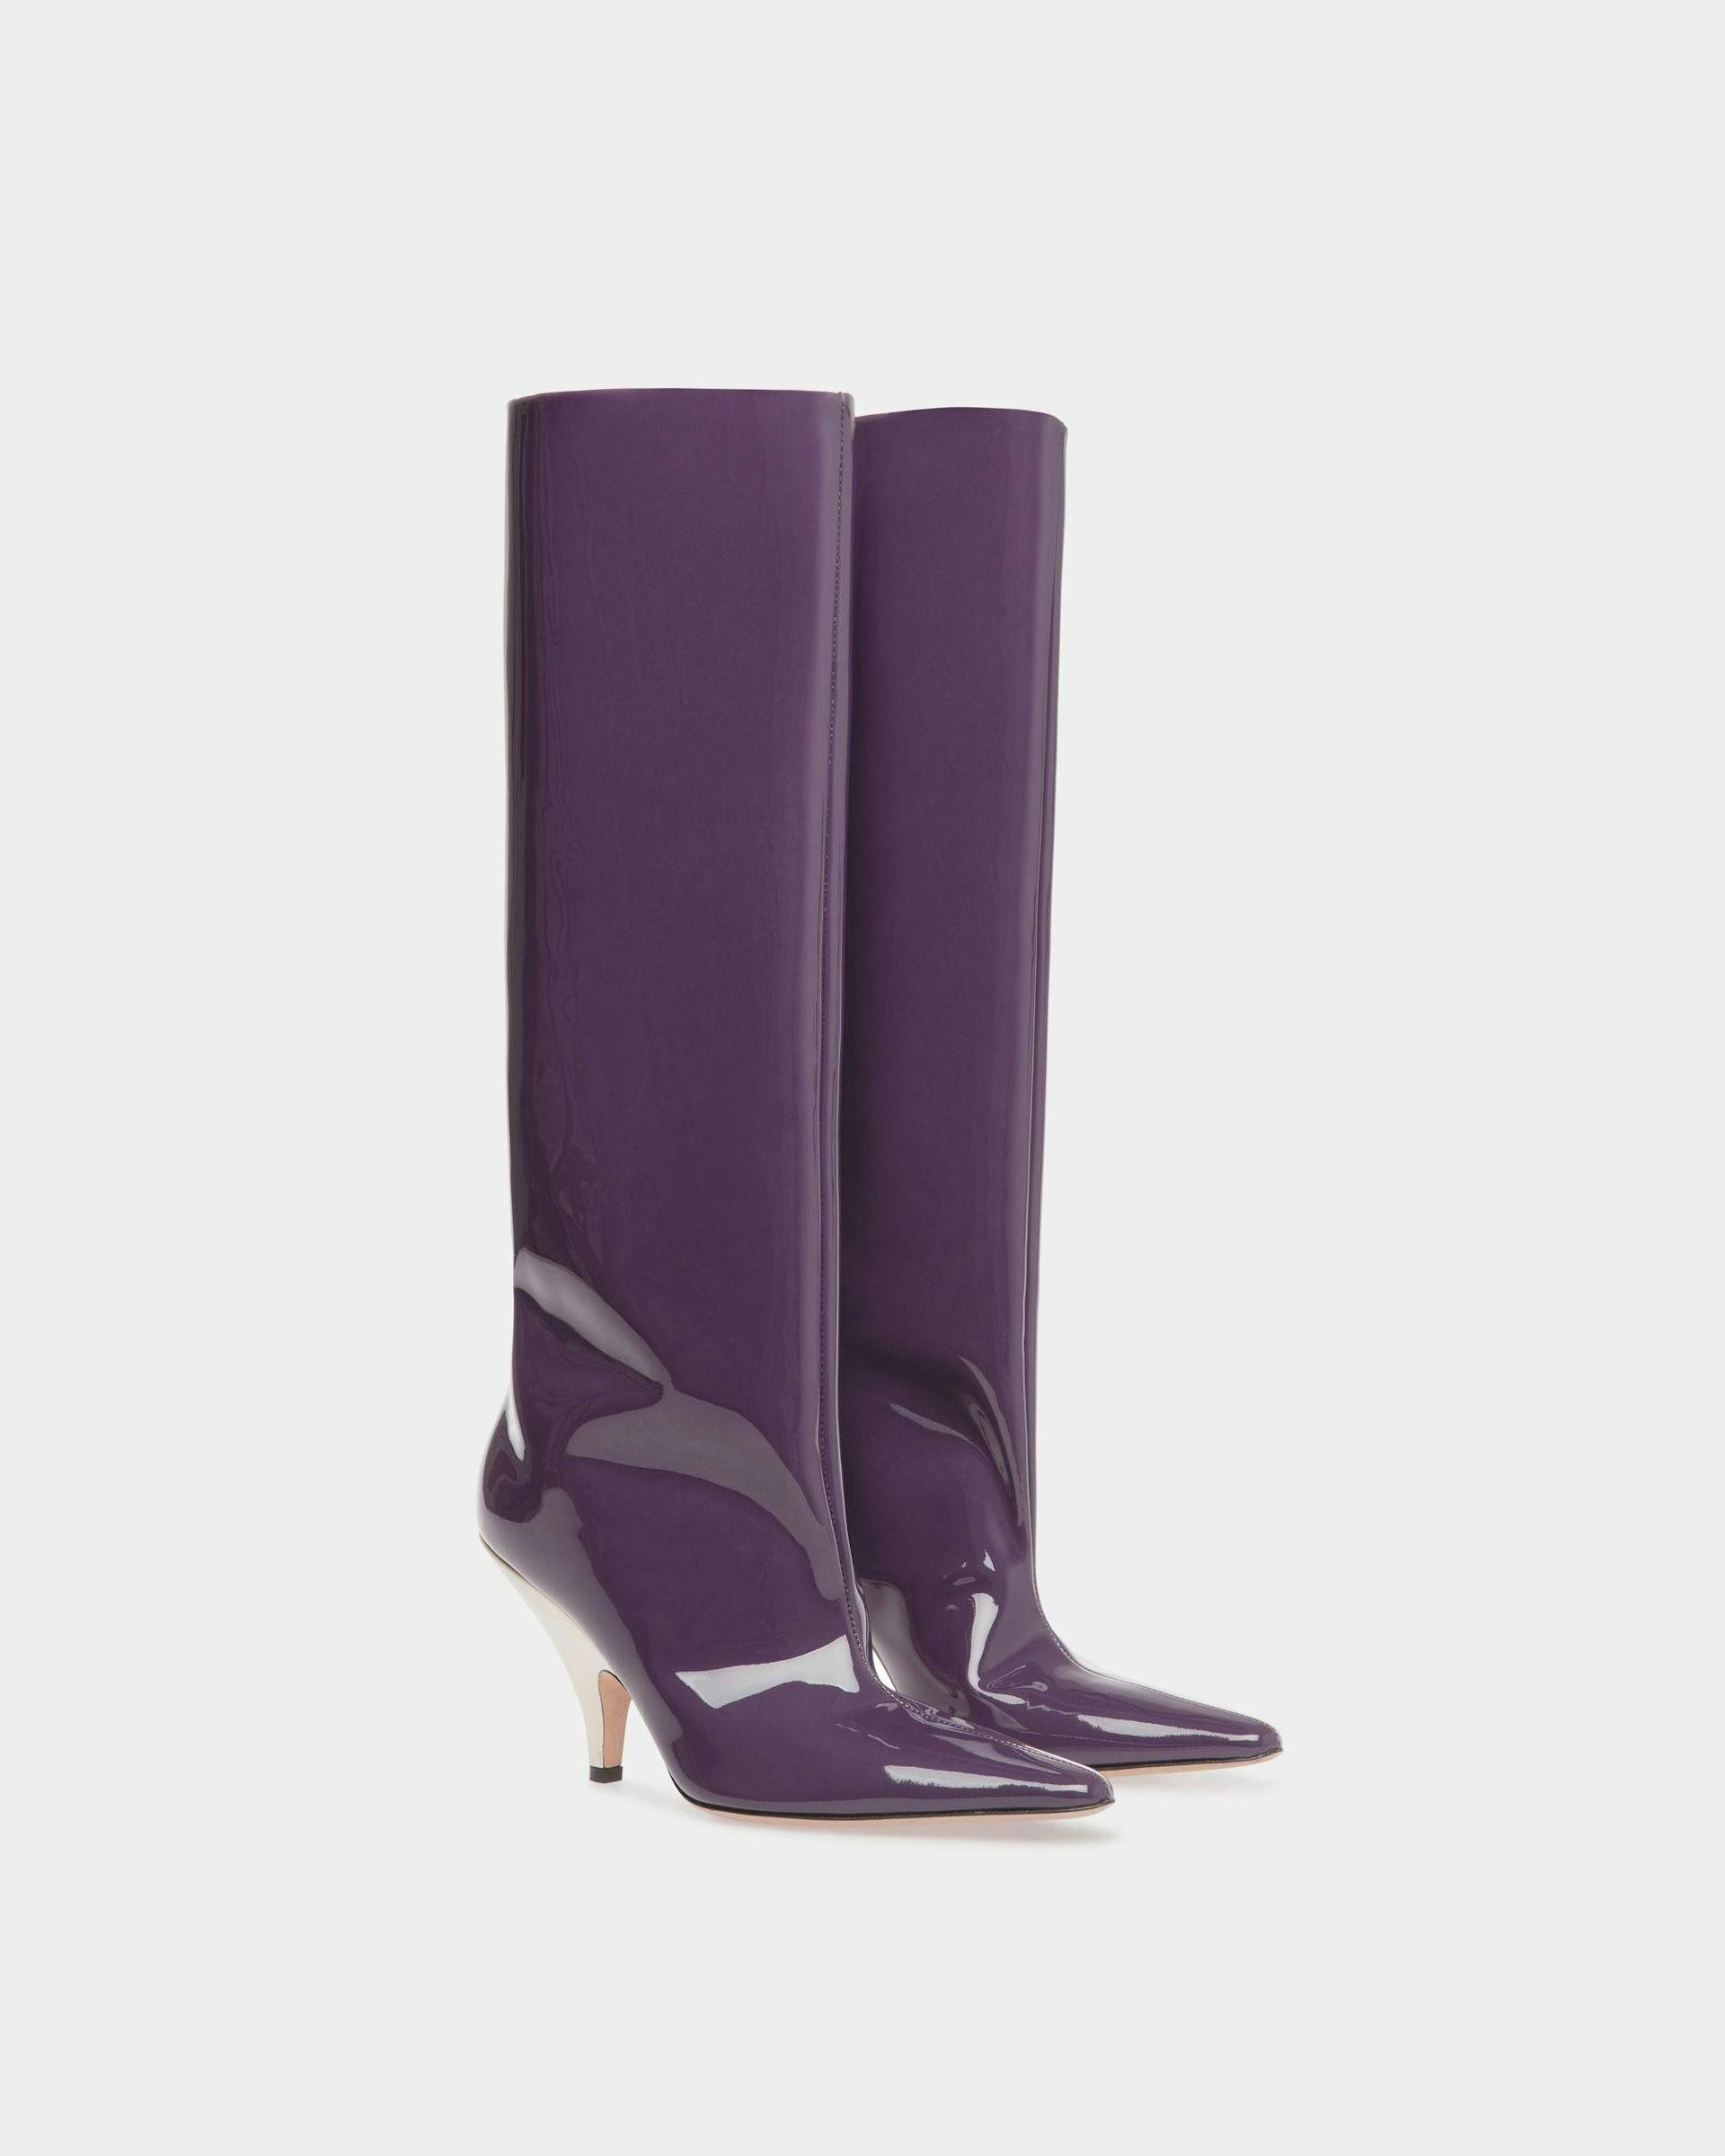 Women's Katy Long Boots In Orchid Leather | Bally | Still Life 3/4 Front